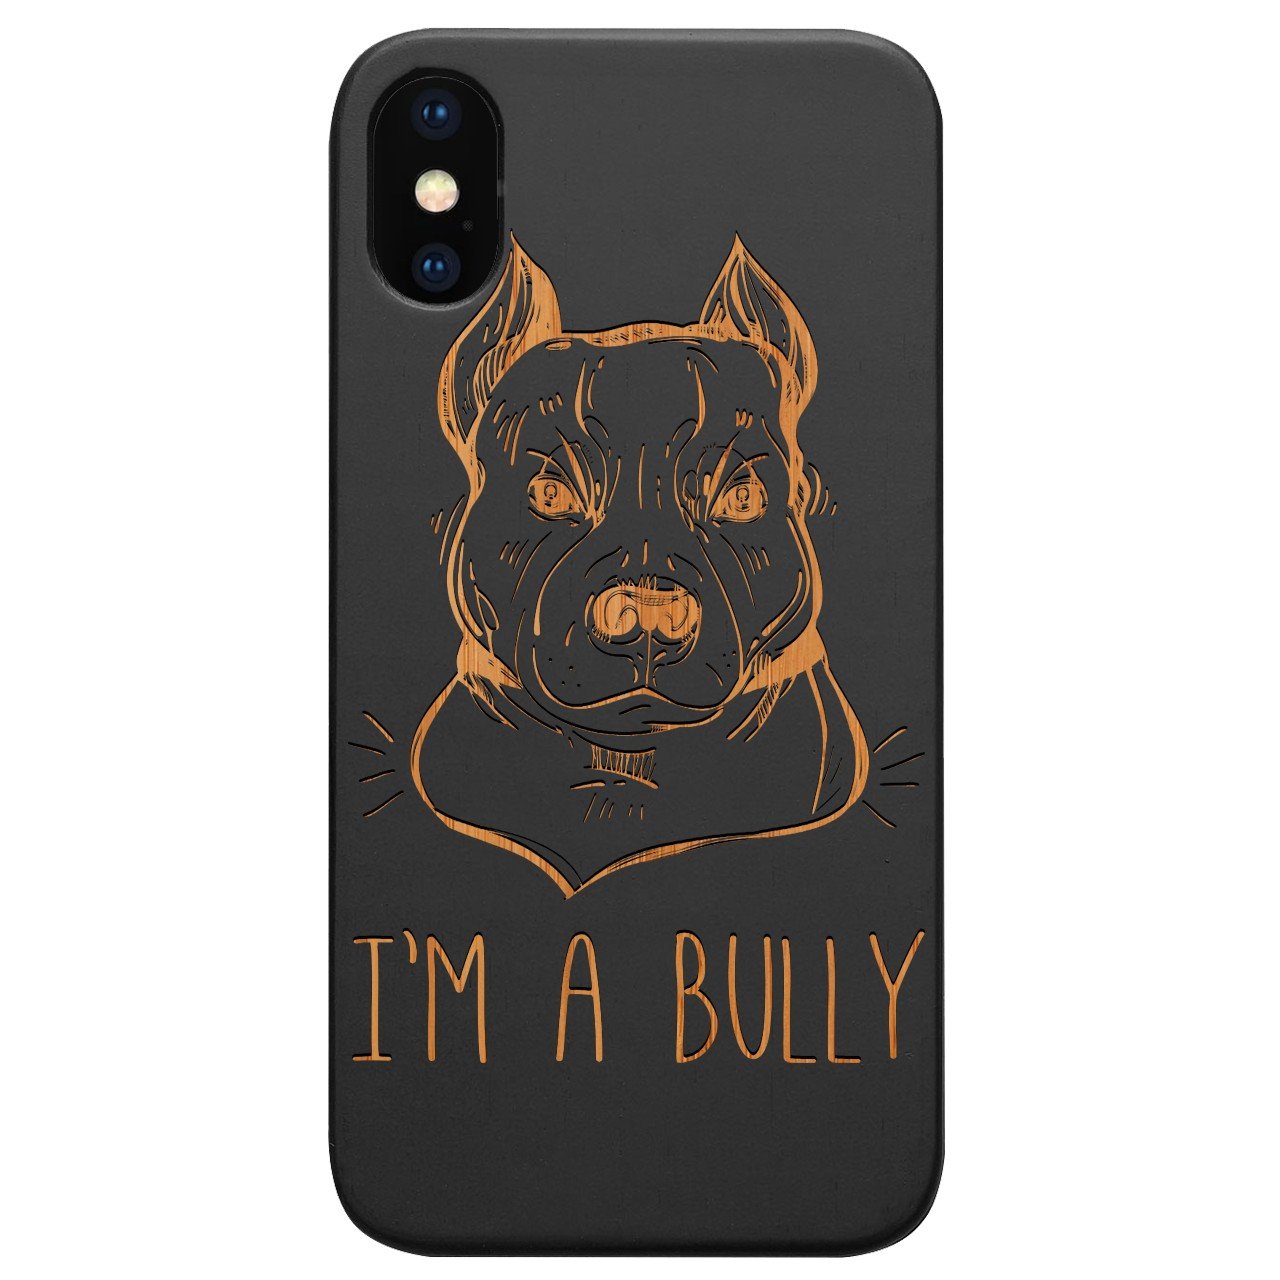 Bully - Engraved - Wooden Phone Case